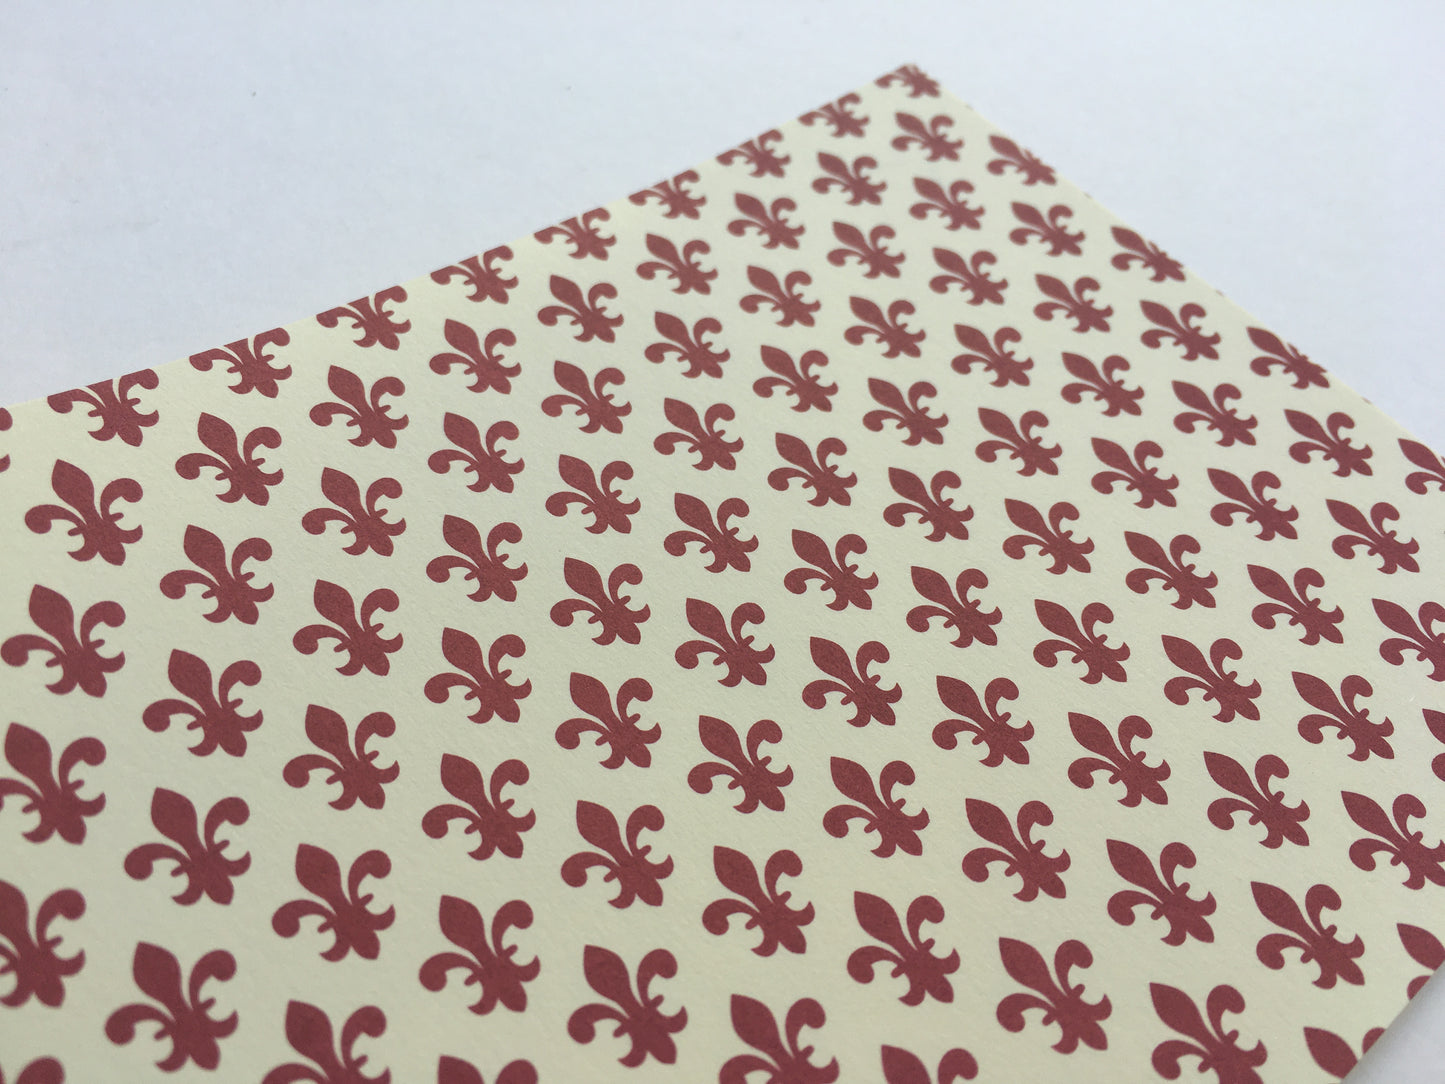 TBBIDP10C- Maroon- Italian Decorative Paper- 100 GSM Thick paper for bookbinding- Suitable for book covers and end sheets